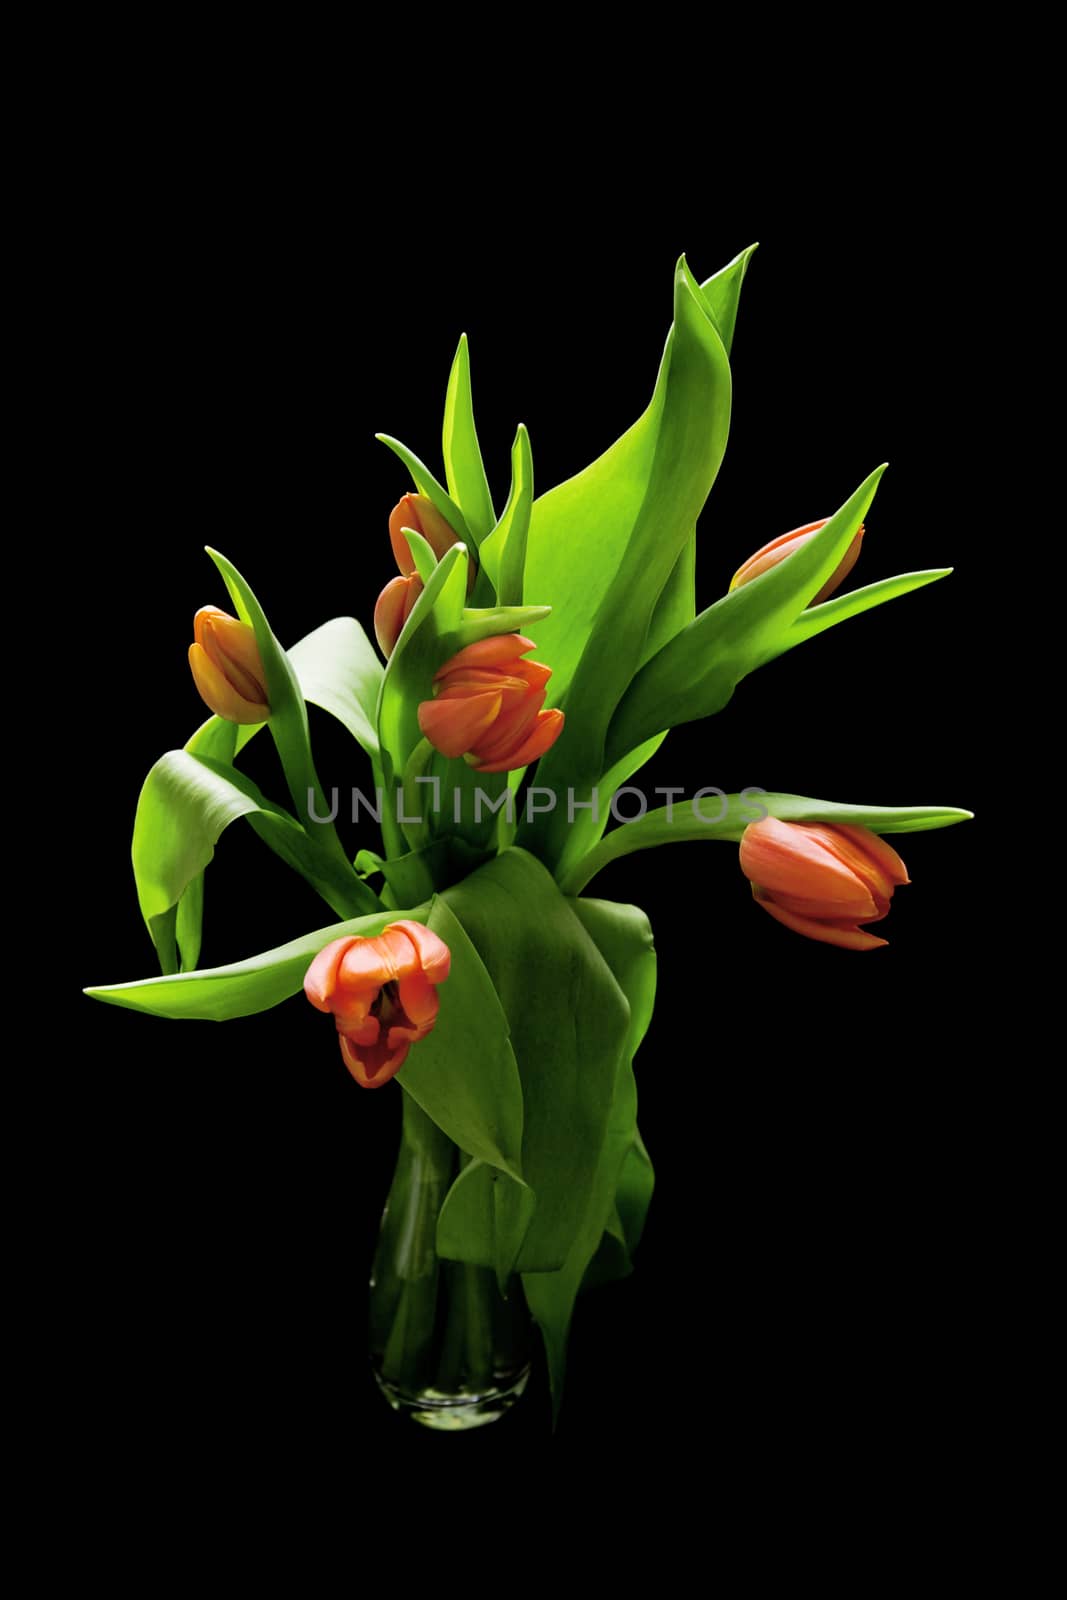 bouquet of red tulips on black background by Serp